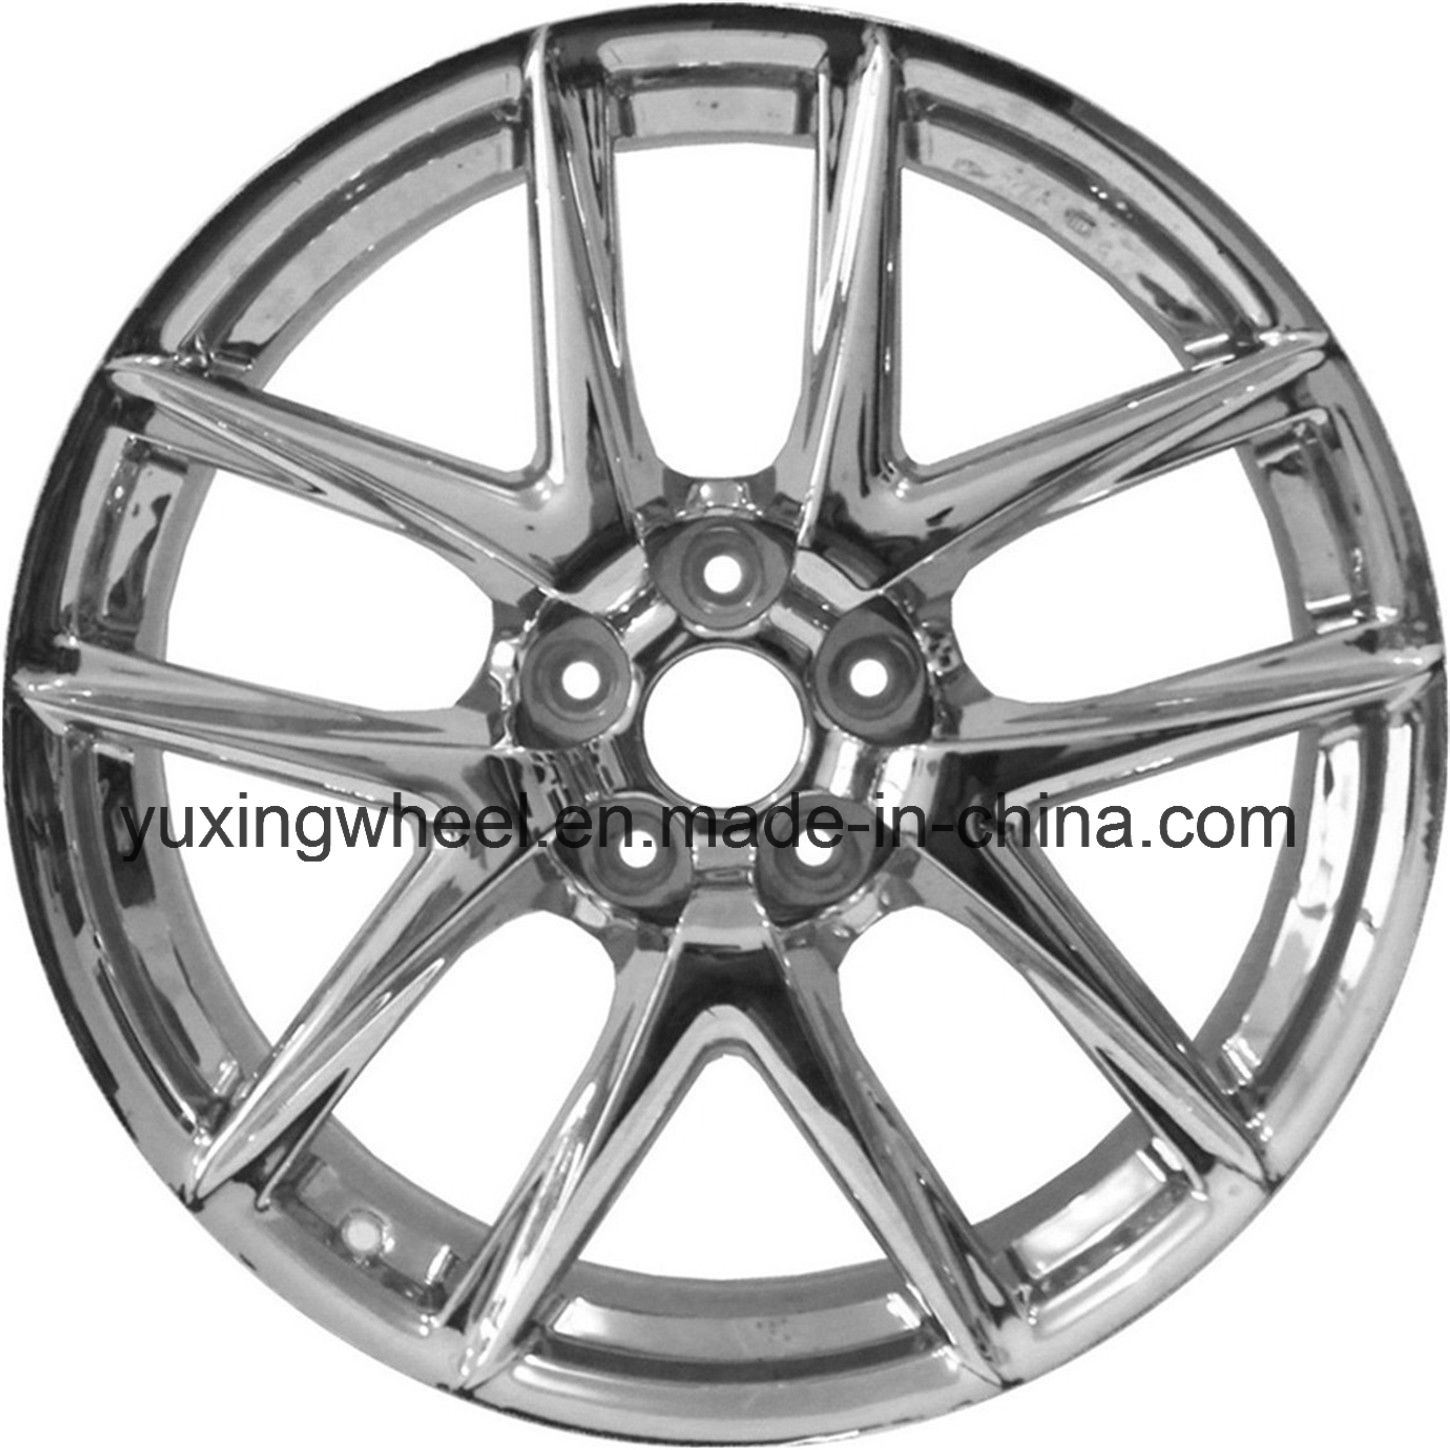 Competitive Price Car Arts 19 Inch Alloy Wheel